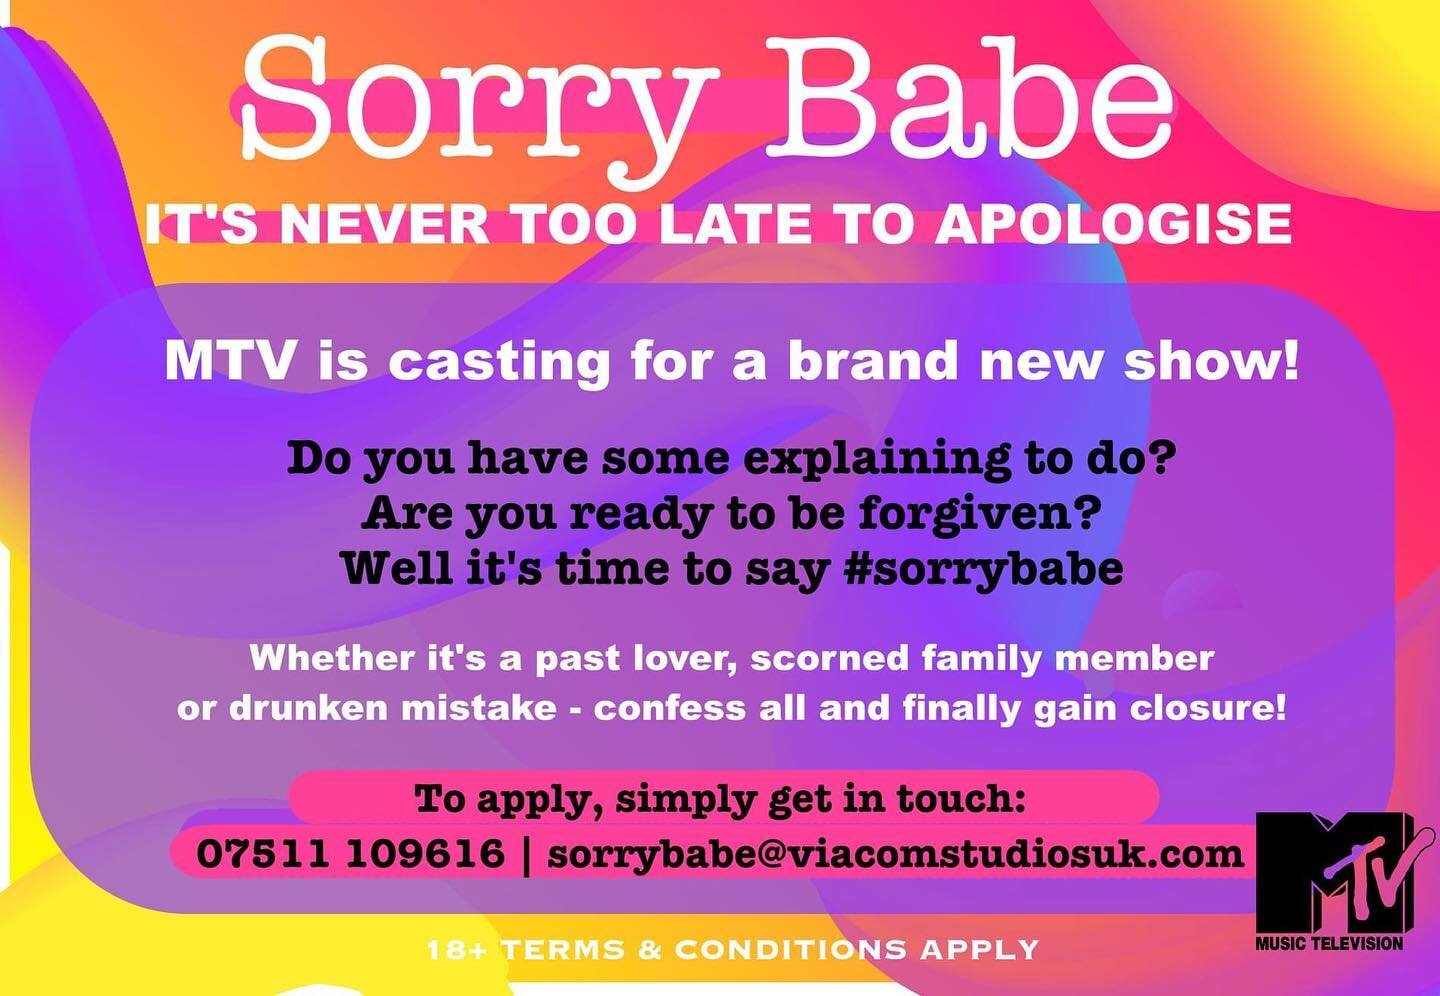 ** UK - TV CASTING **

MTV ARE CASTING FOR A NEW REALITY SHOW!

Is there someone in your past or present that deserves an apology? Maybe now is the time to say sorry and wipe the slate clean!
🤝
Viacom Studios are casting new talent for a new MTV sho